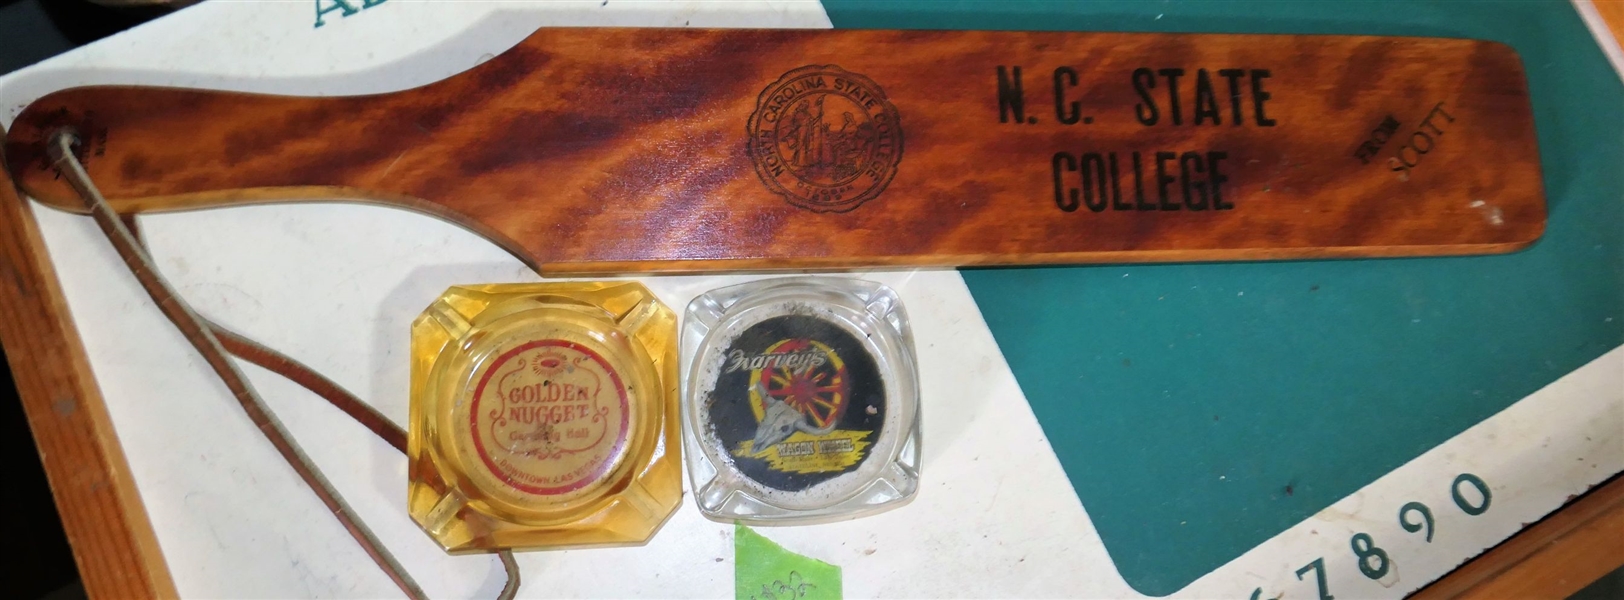 NC State Wood Paddle and 2 Las Vegas Ash Trays -  Harveys and Golden Nugget